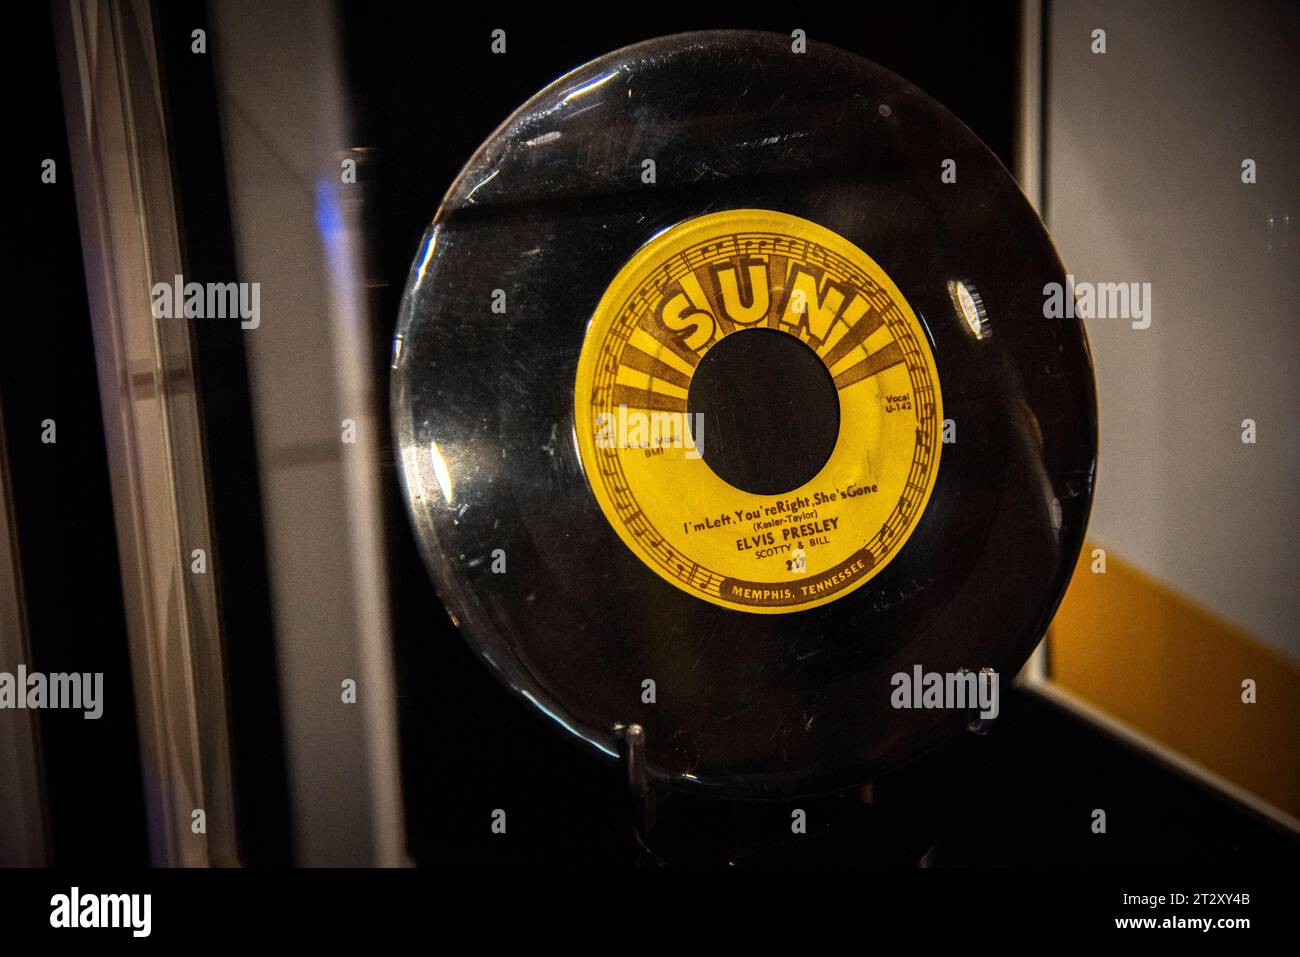 That's All Right, Elvis Presley's Sun record, at the Direct from Graceland: Elvis exhibition which is held at the Arches London Bridge 'Direct from Graceland: Elvis' exhibition, a major new retrospective exhibition exploring the life of Elvis Presley who to this day is one of the most iconic and influential figures of the 20th Century, is the opening exhibition at new arts and culture venue, Arches London Bridge.The Direct From Graceland: Elvis exhibition feature over 450 artifacts owned by Elvis Presley, direct from the icon's Graceland home in Memphis, Tennessee - including his military unif Stock Photo